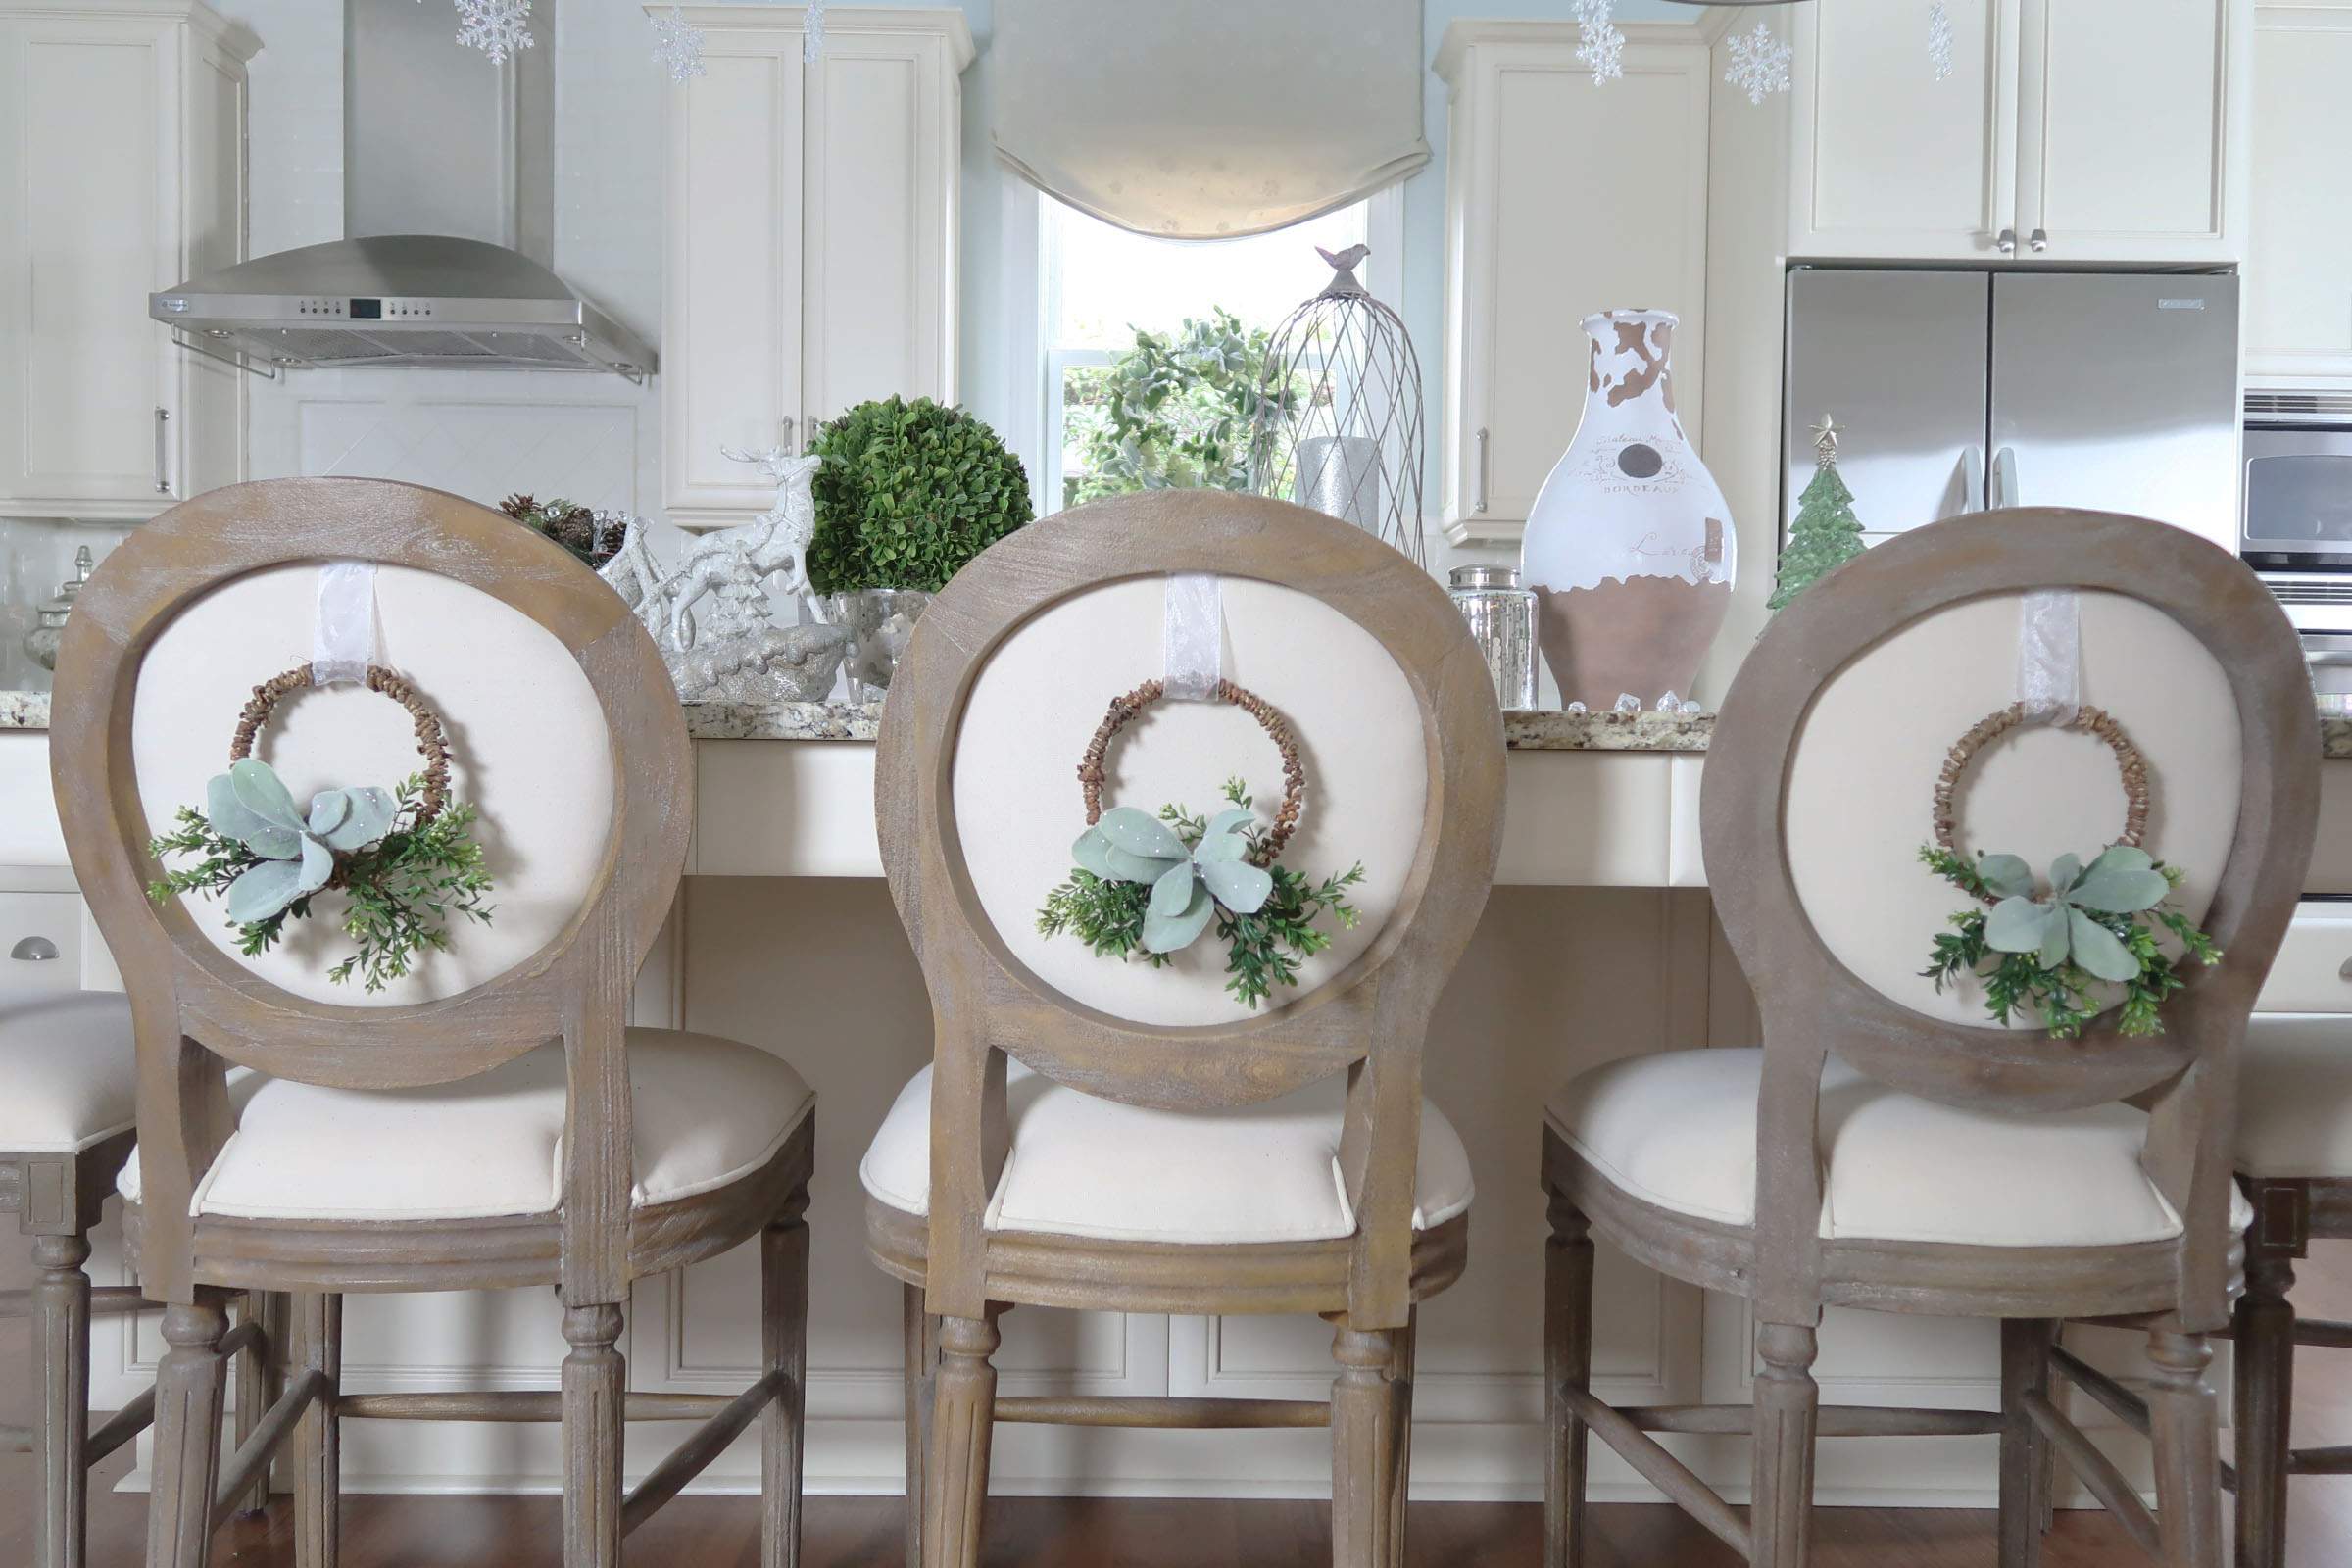 Lambs Ear Wreaths on 3 Chairs_Porch Daydreamer